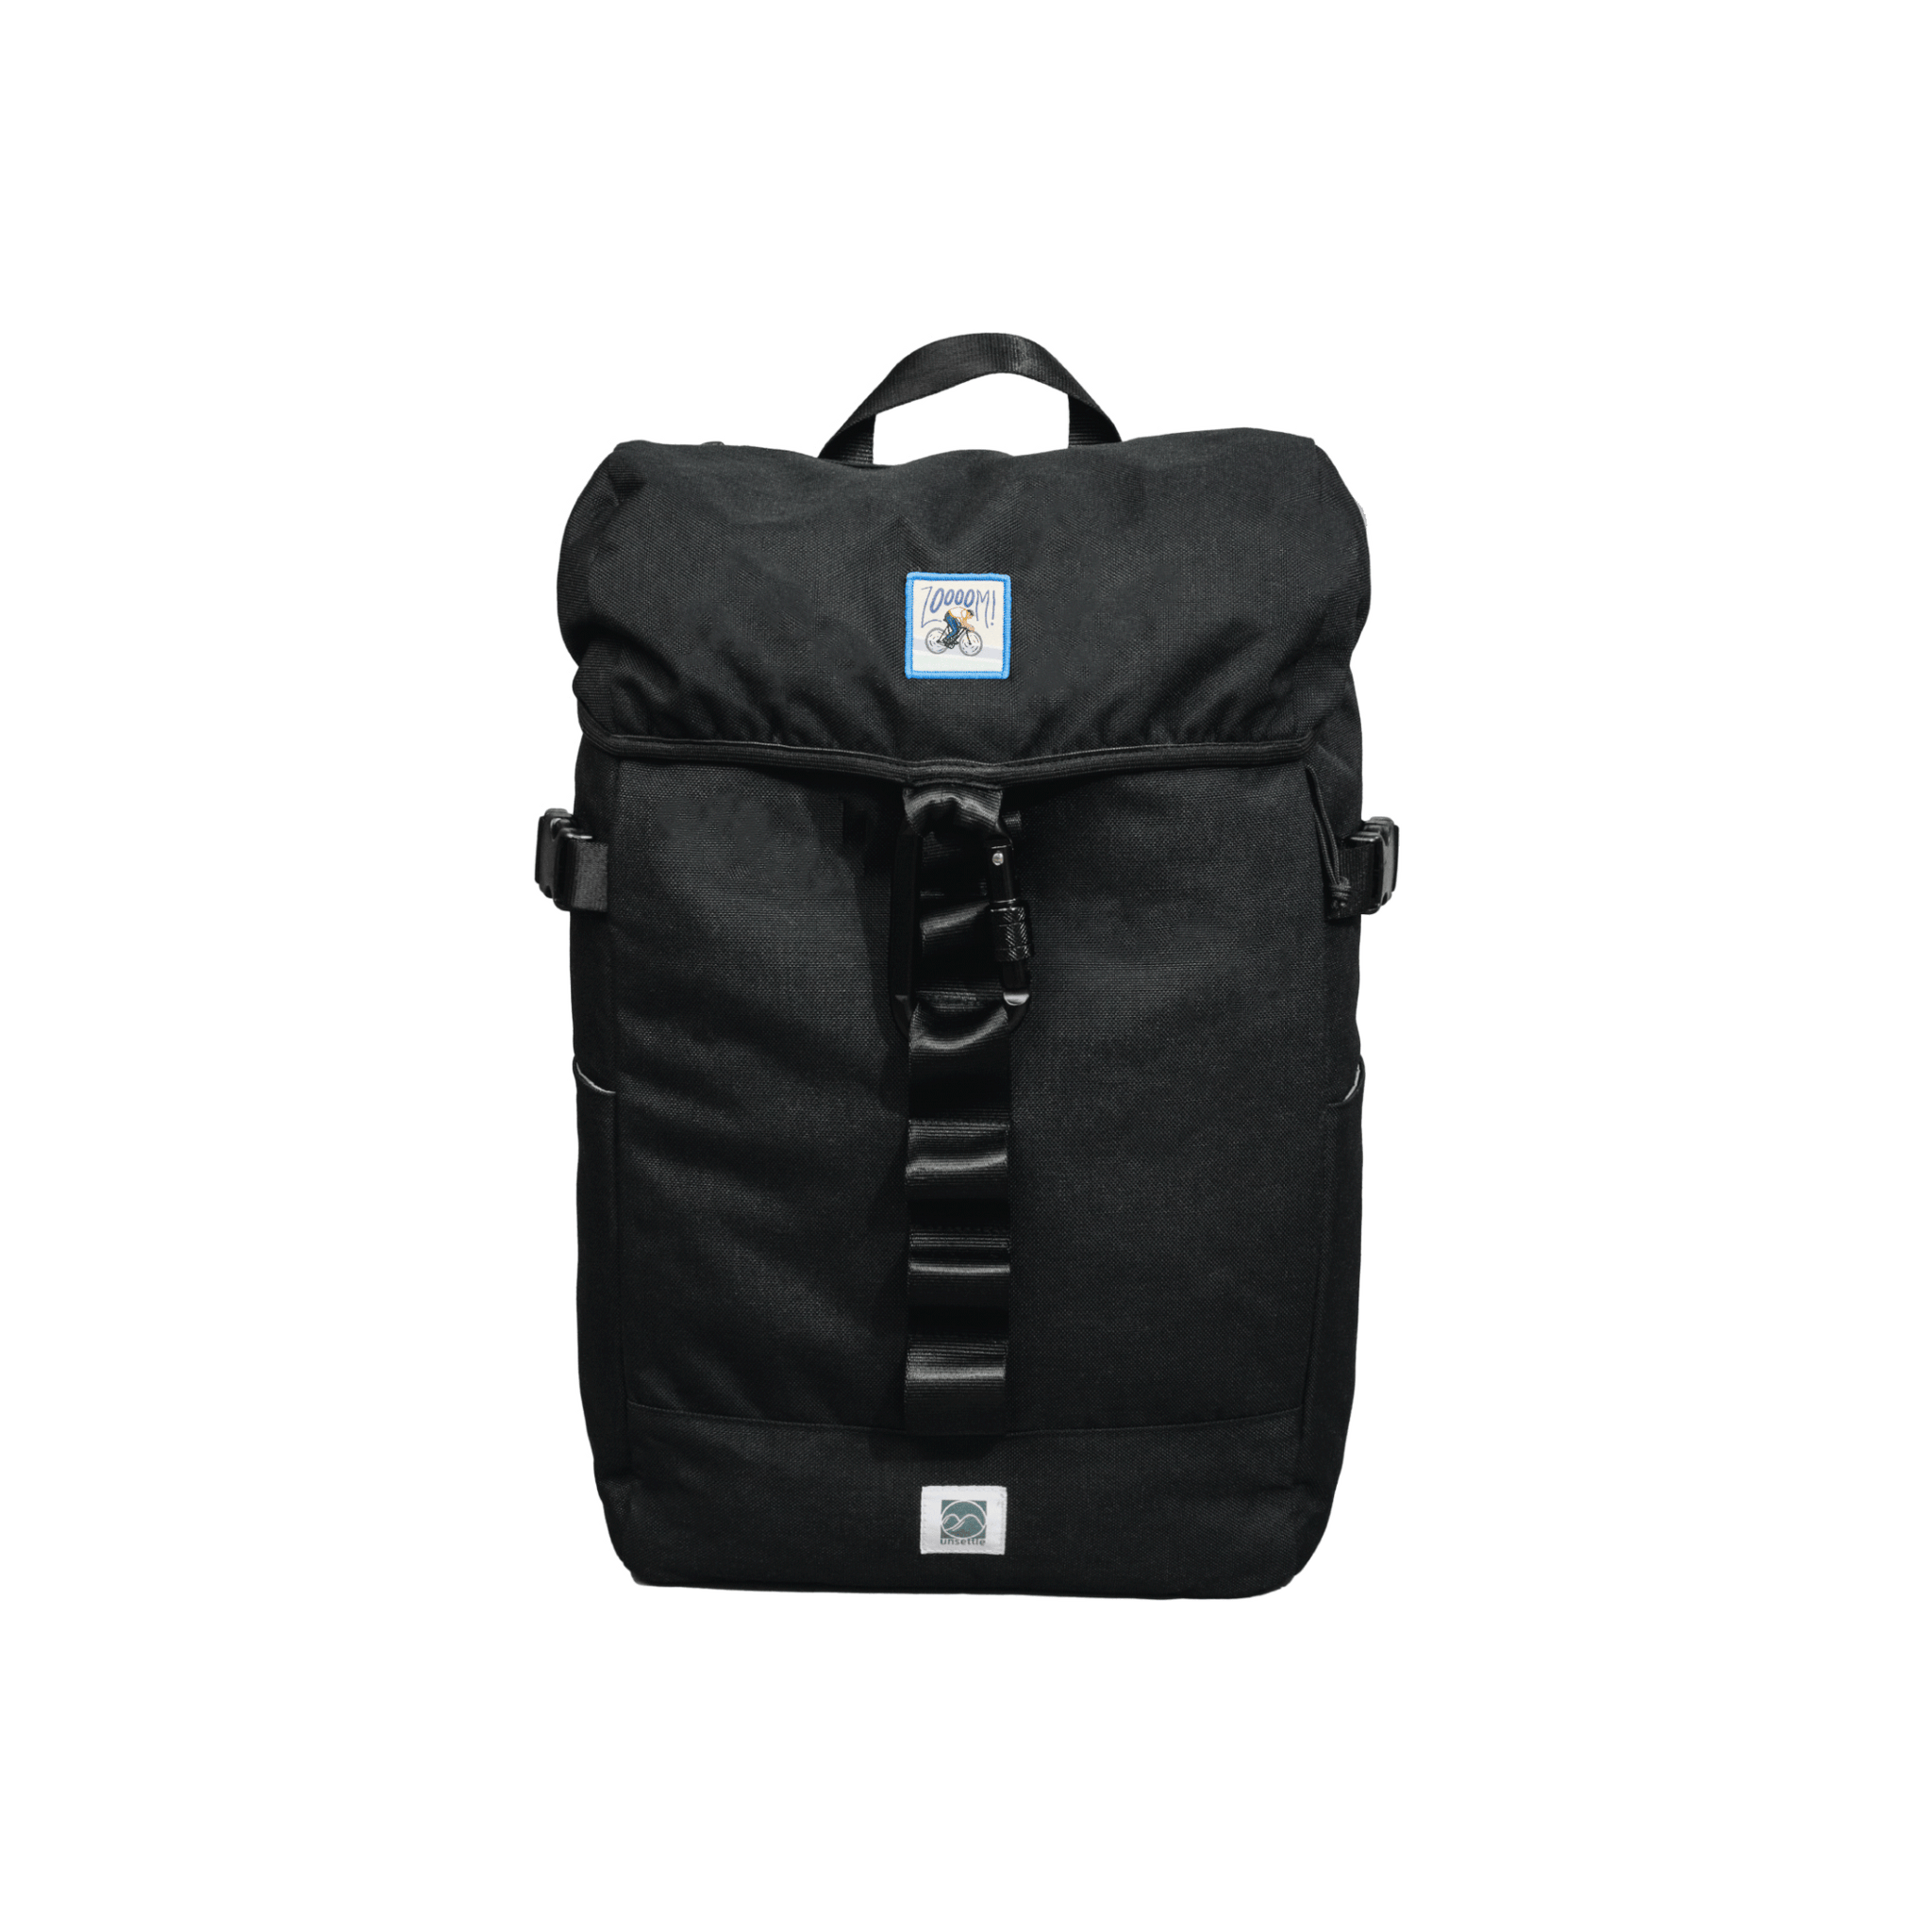 black rucksack backpack with patches